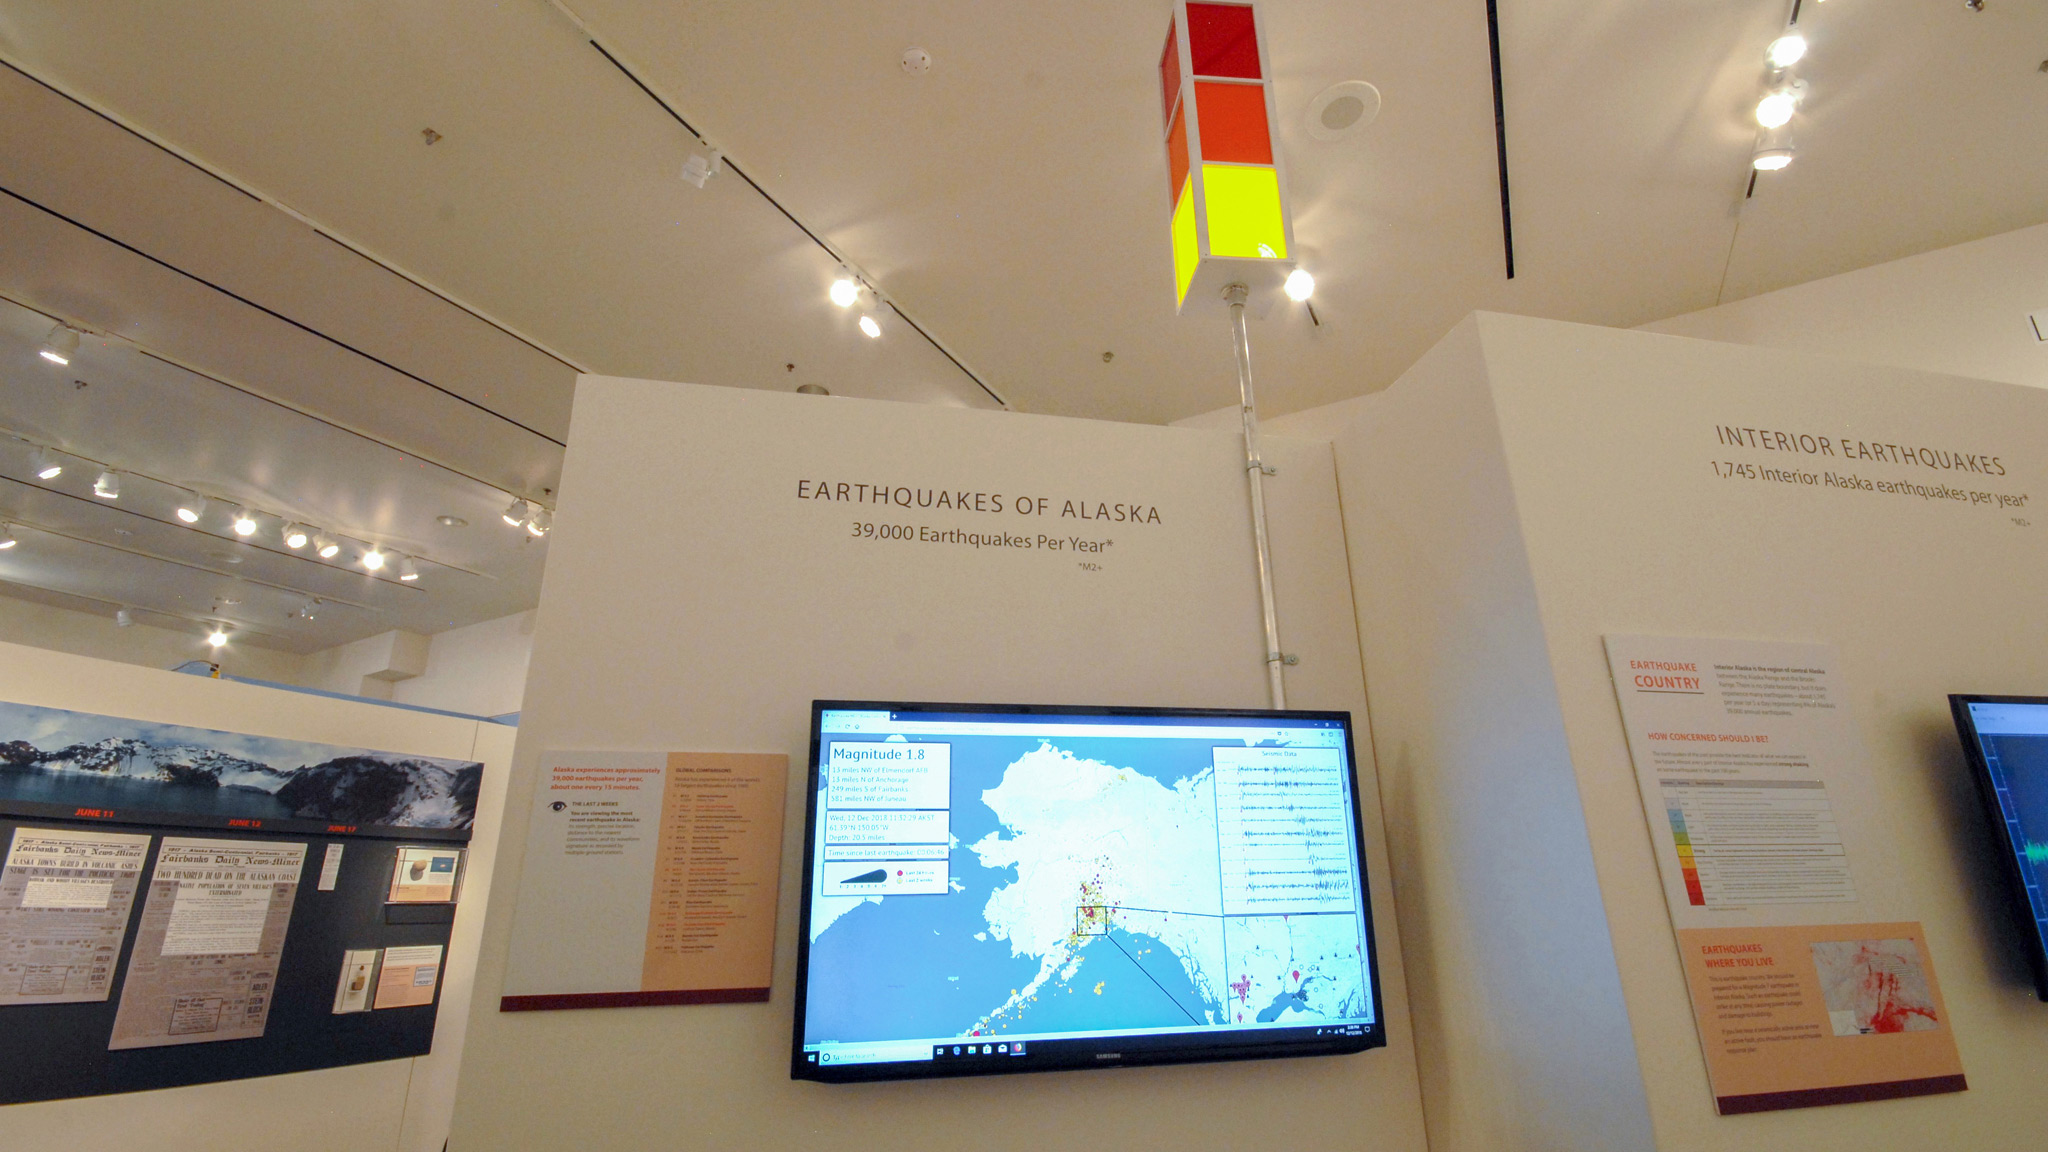 The exhibition’s Alaska Earthquake Map marks the prior two weeks of earthquakes in the state. This map is accessible online. See the menu for links and online resources.